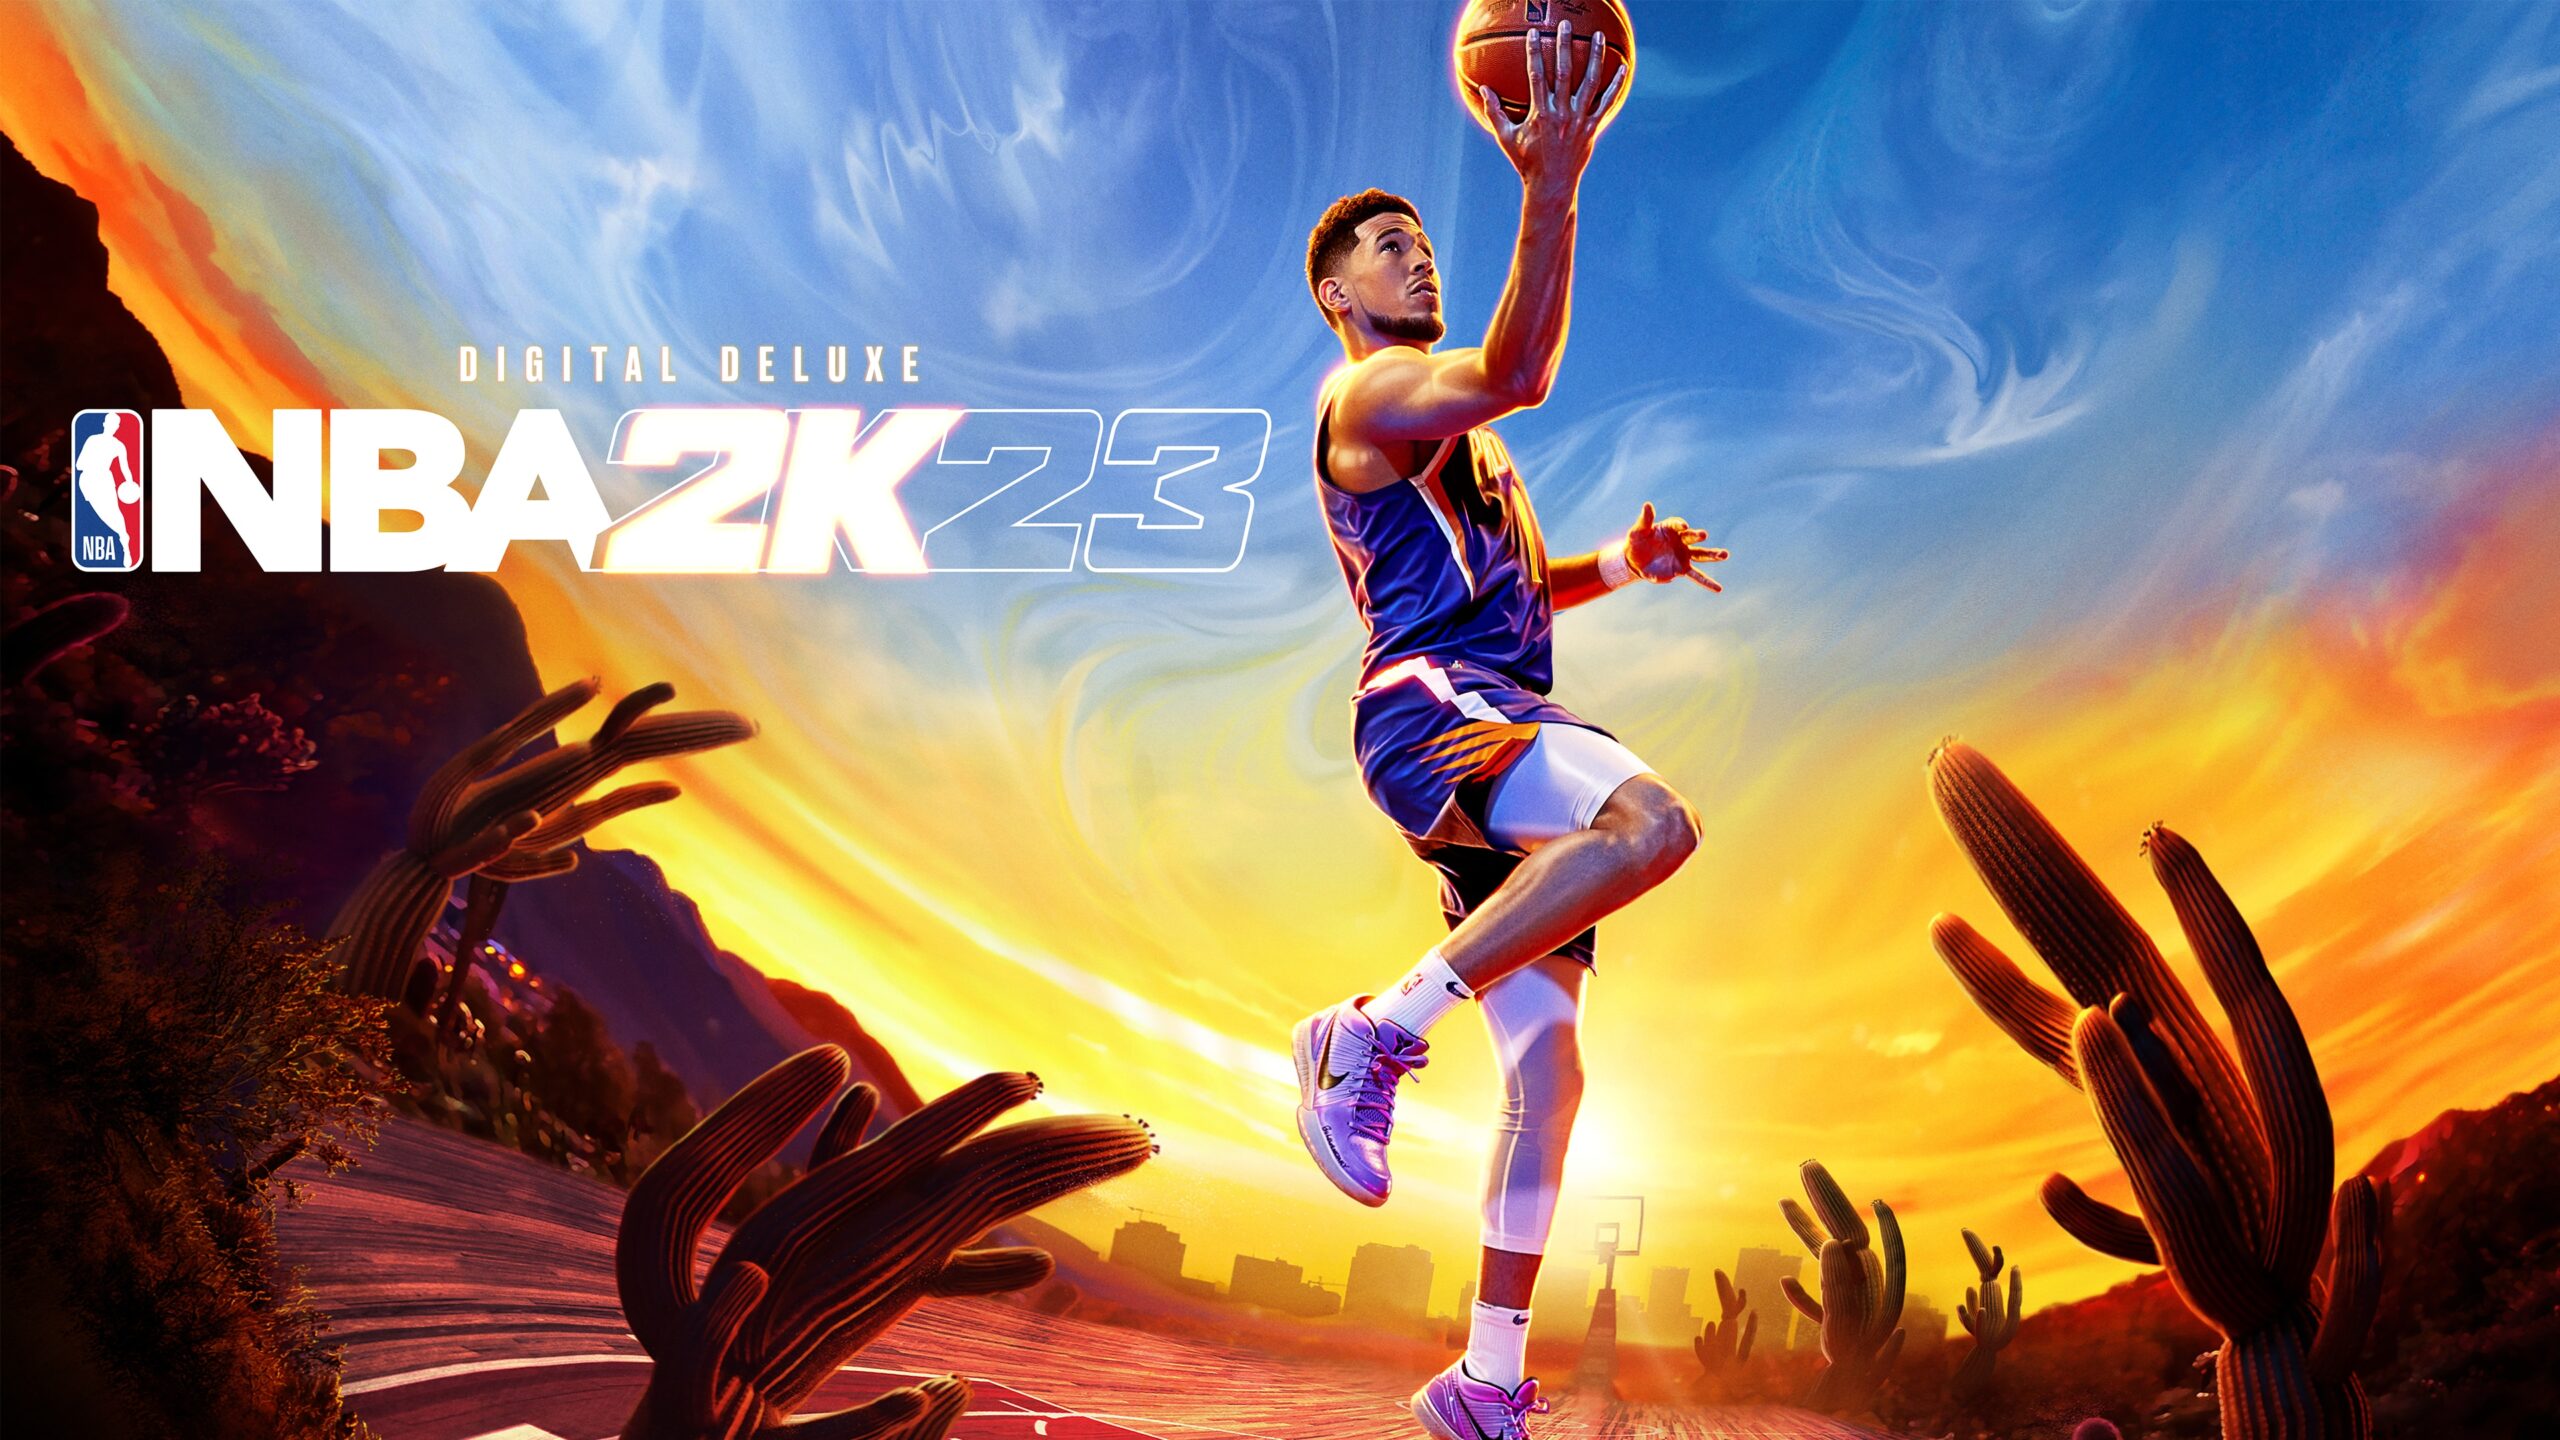 Is NBA 2k23 Cross-play + Zion Williamson Dunk Package - Booker